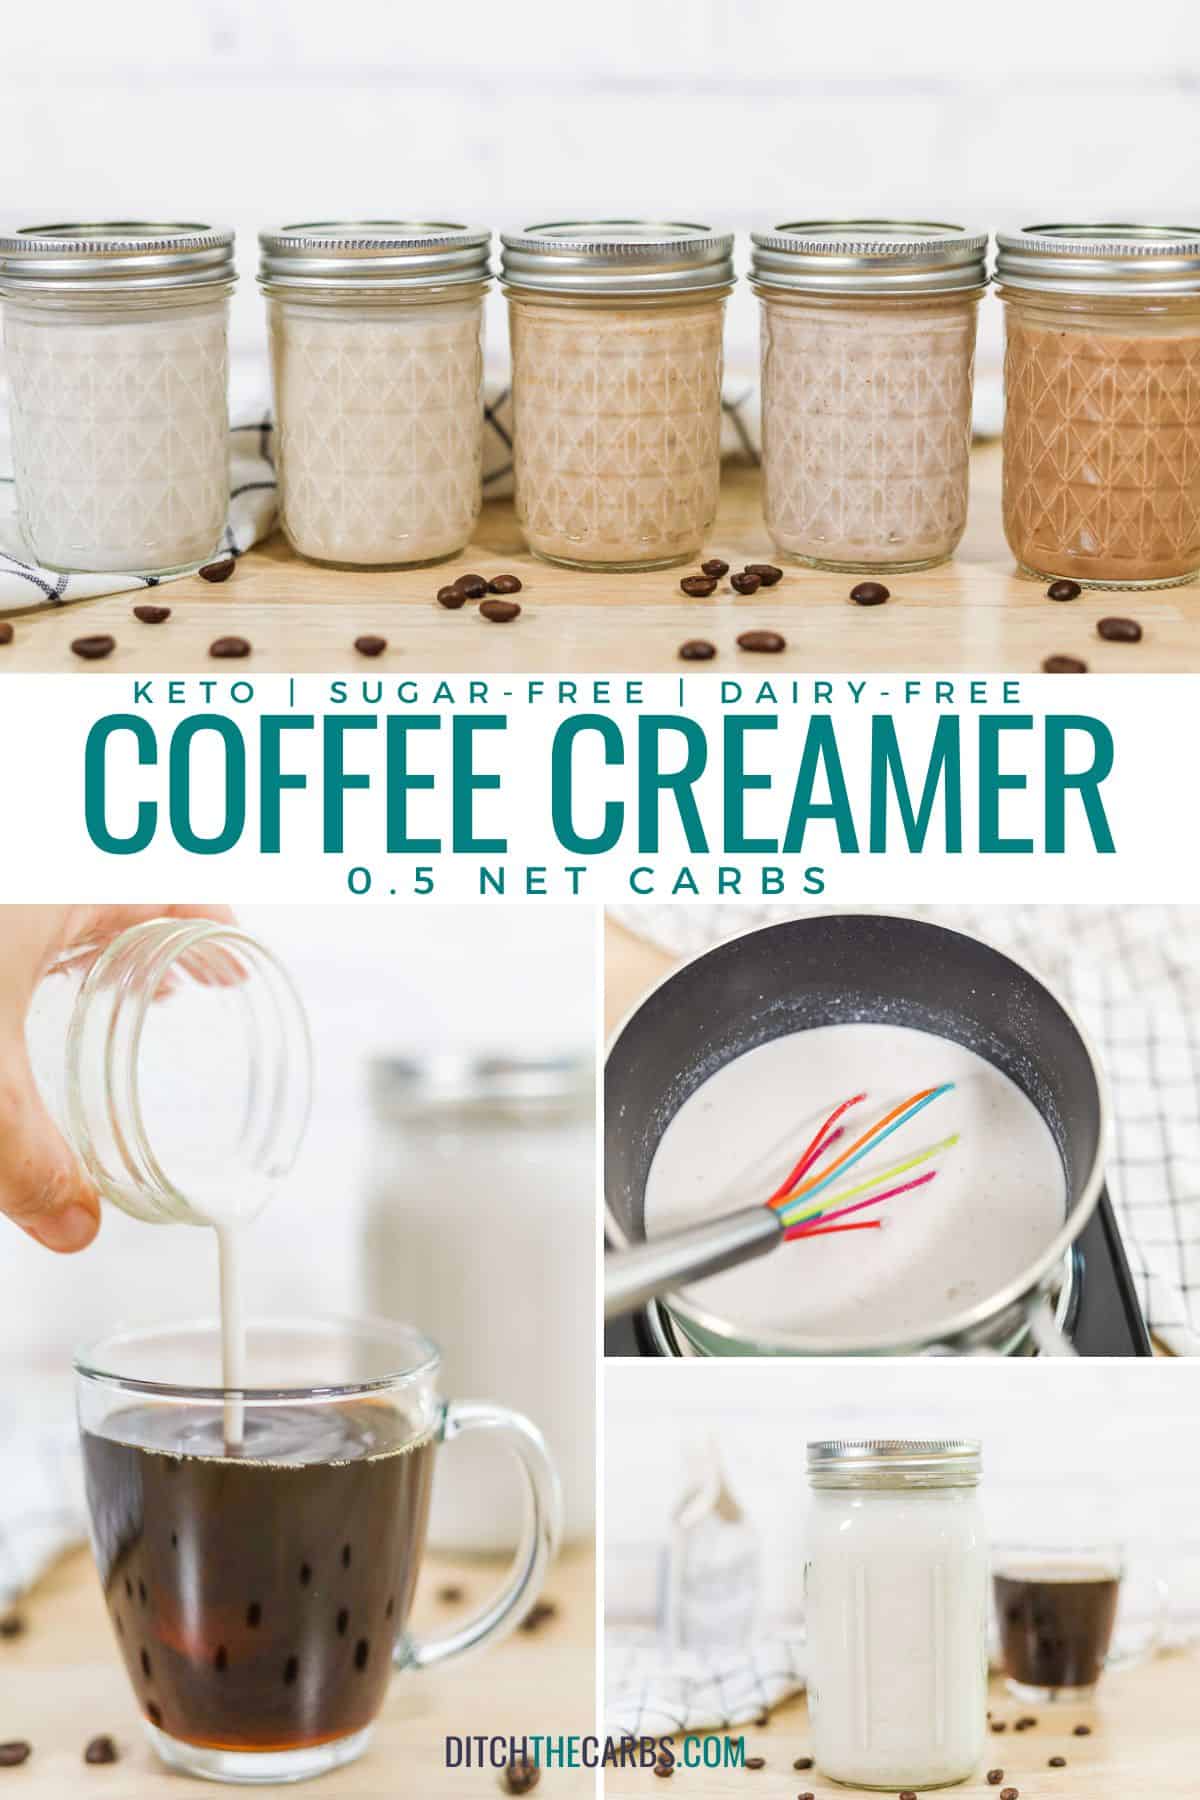 A collage of photos showing keto coffee creamer being made at various stages.